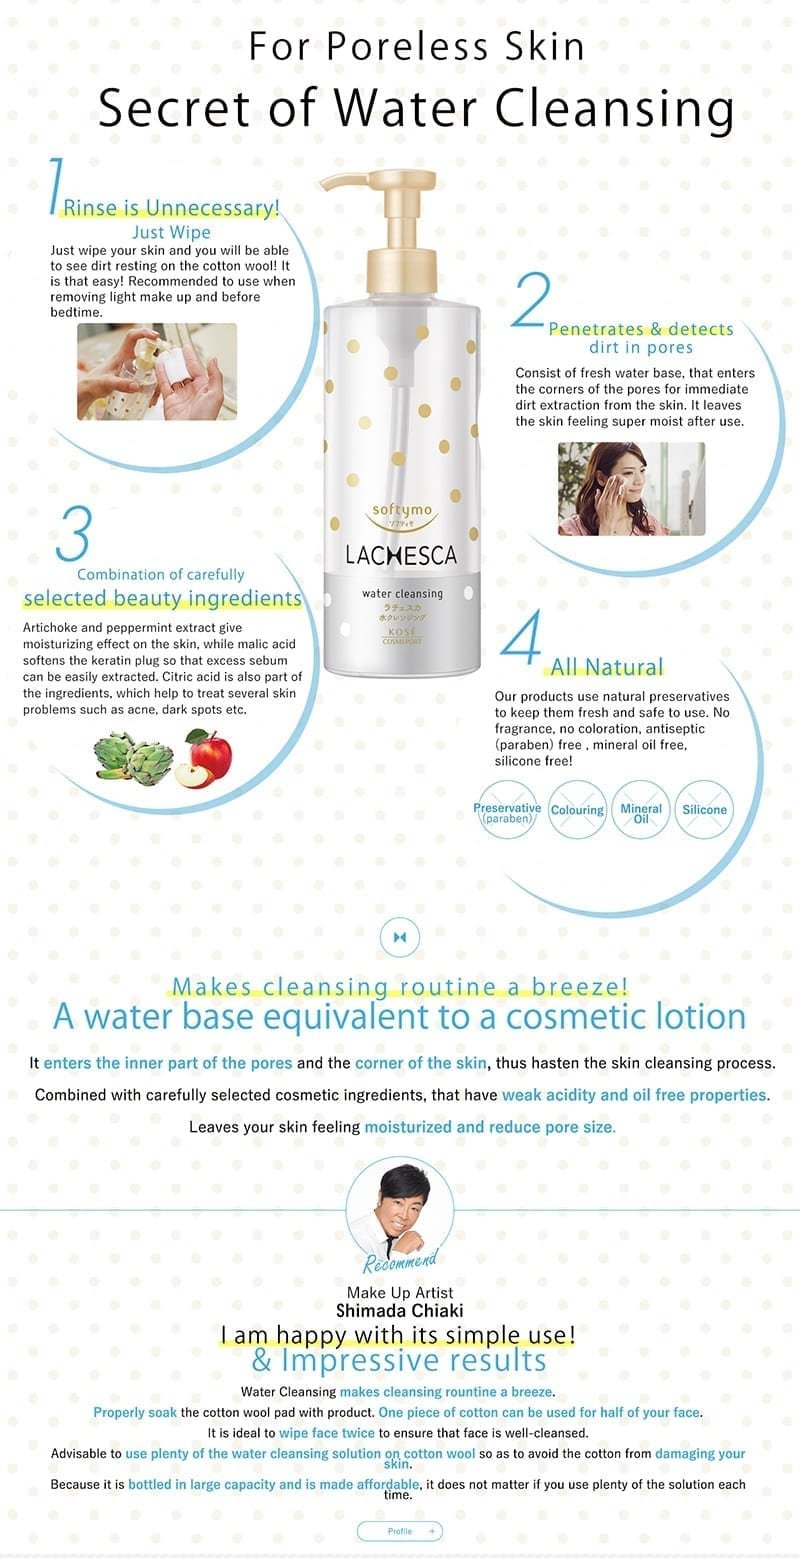 Lachesca Water Cleansing - Info 2